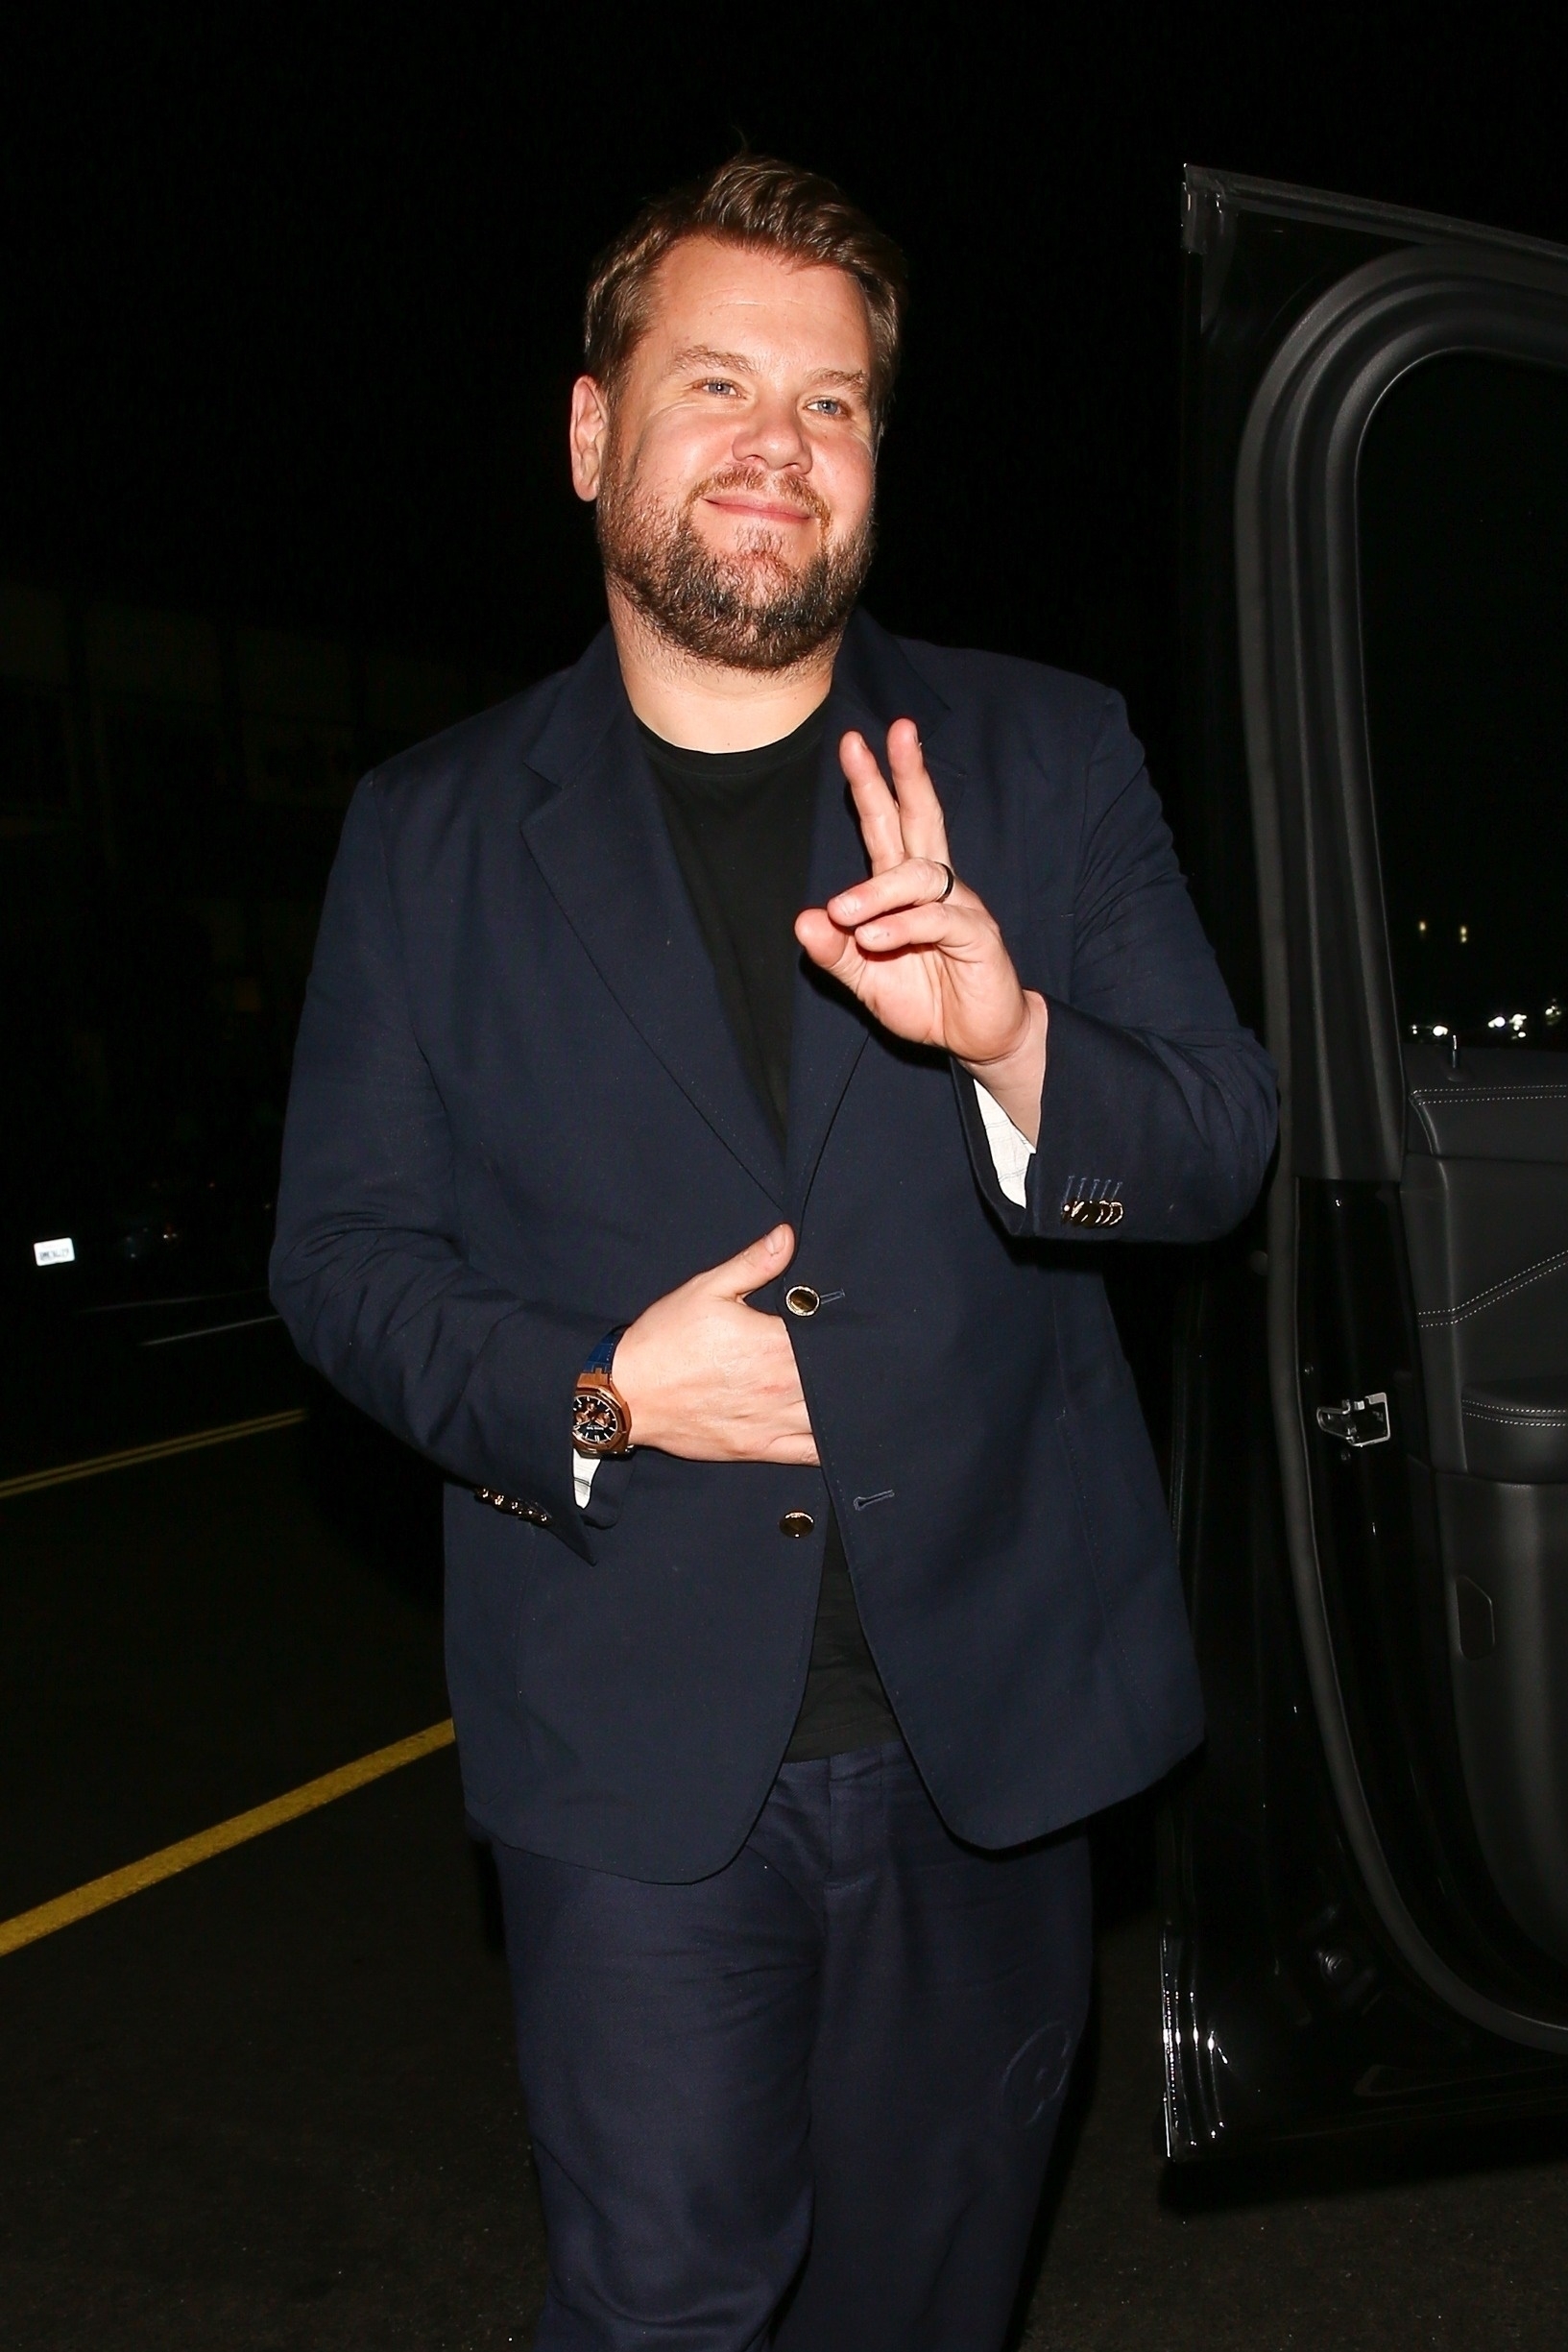 New York City Restaurant Owner Claims James Corden Is The 